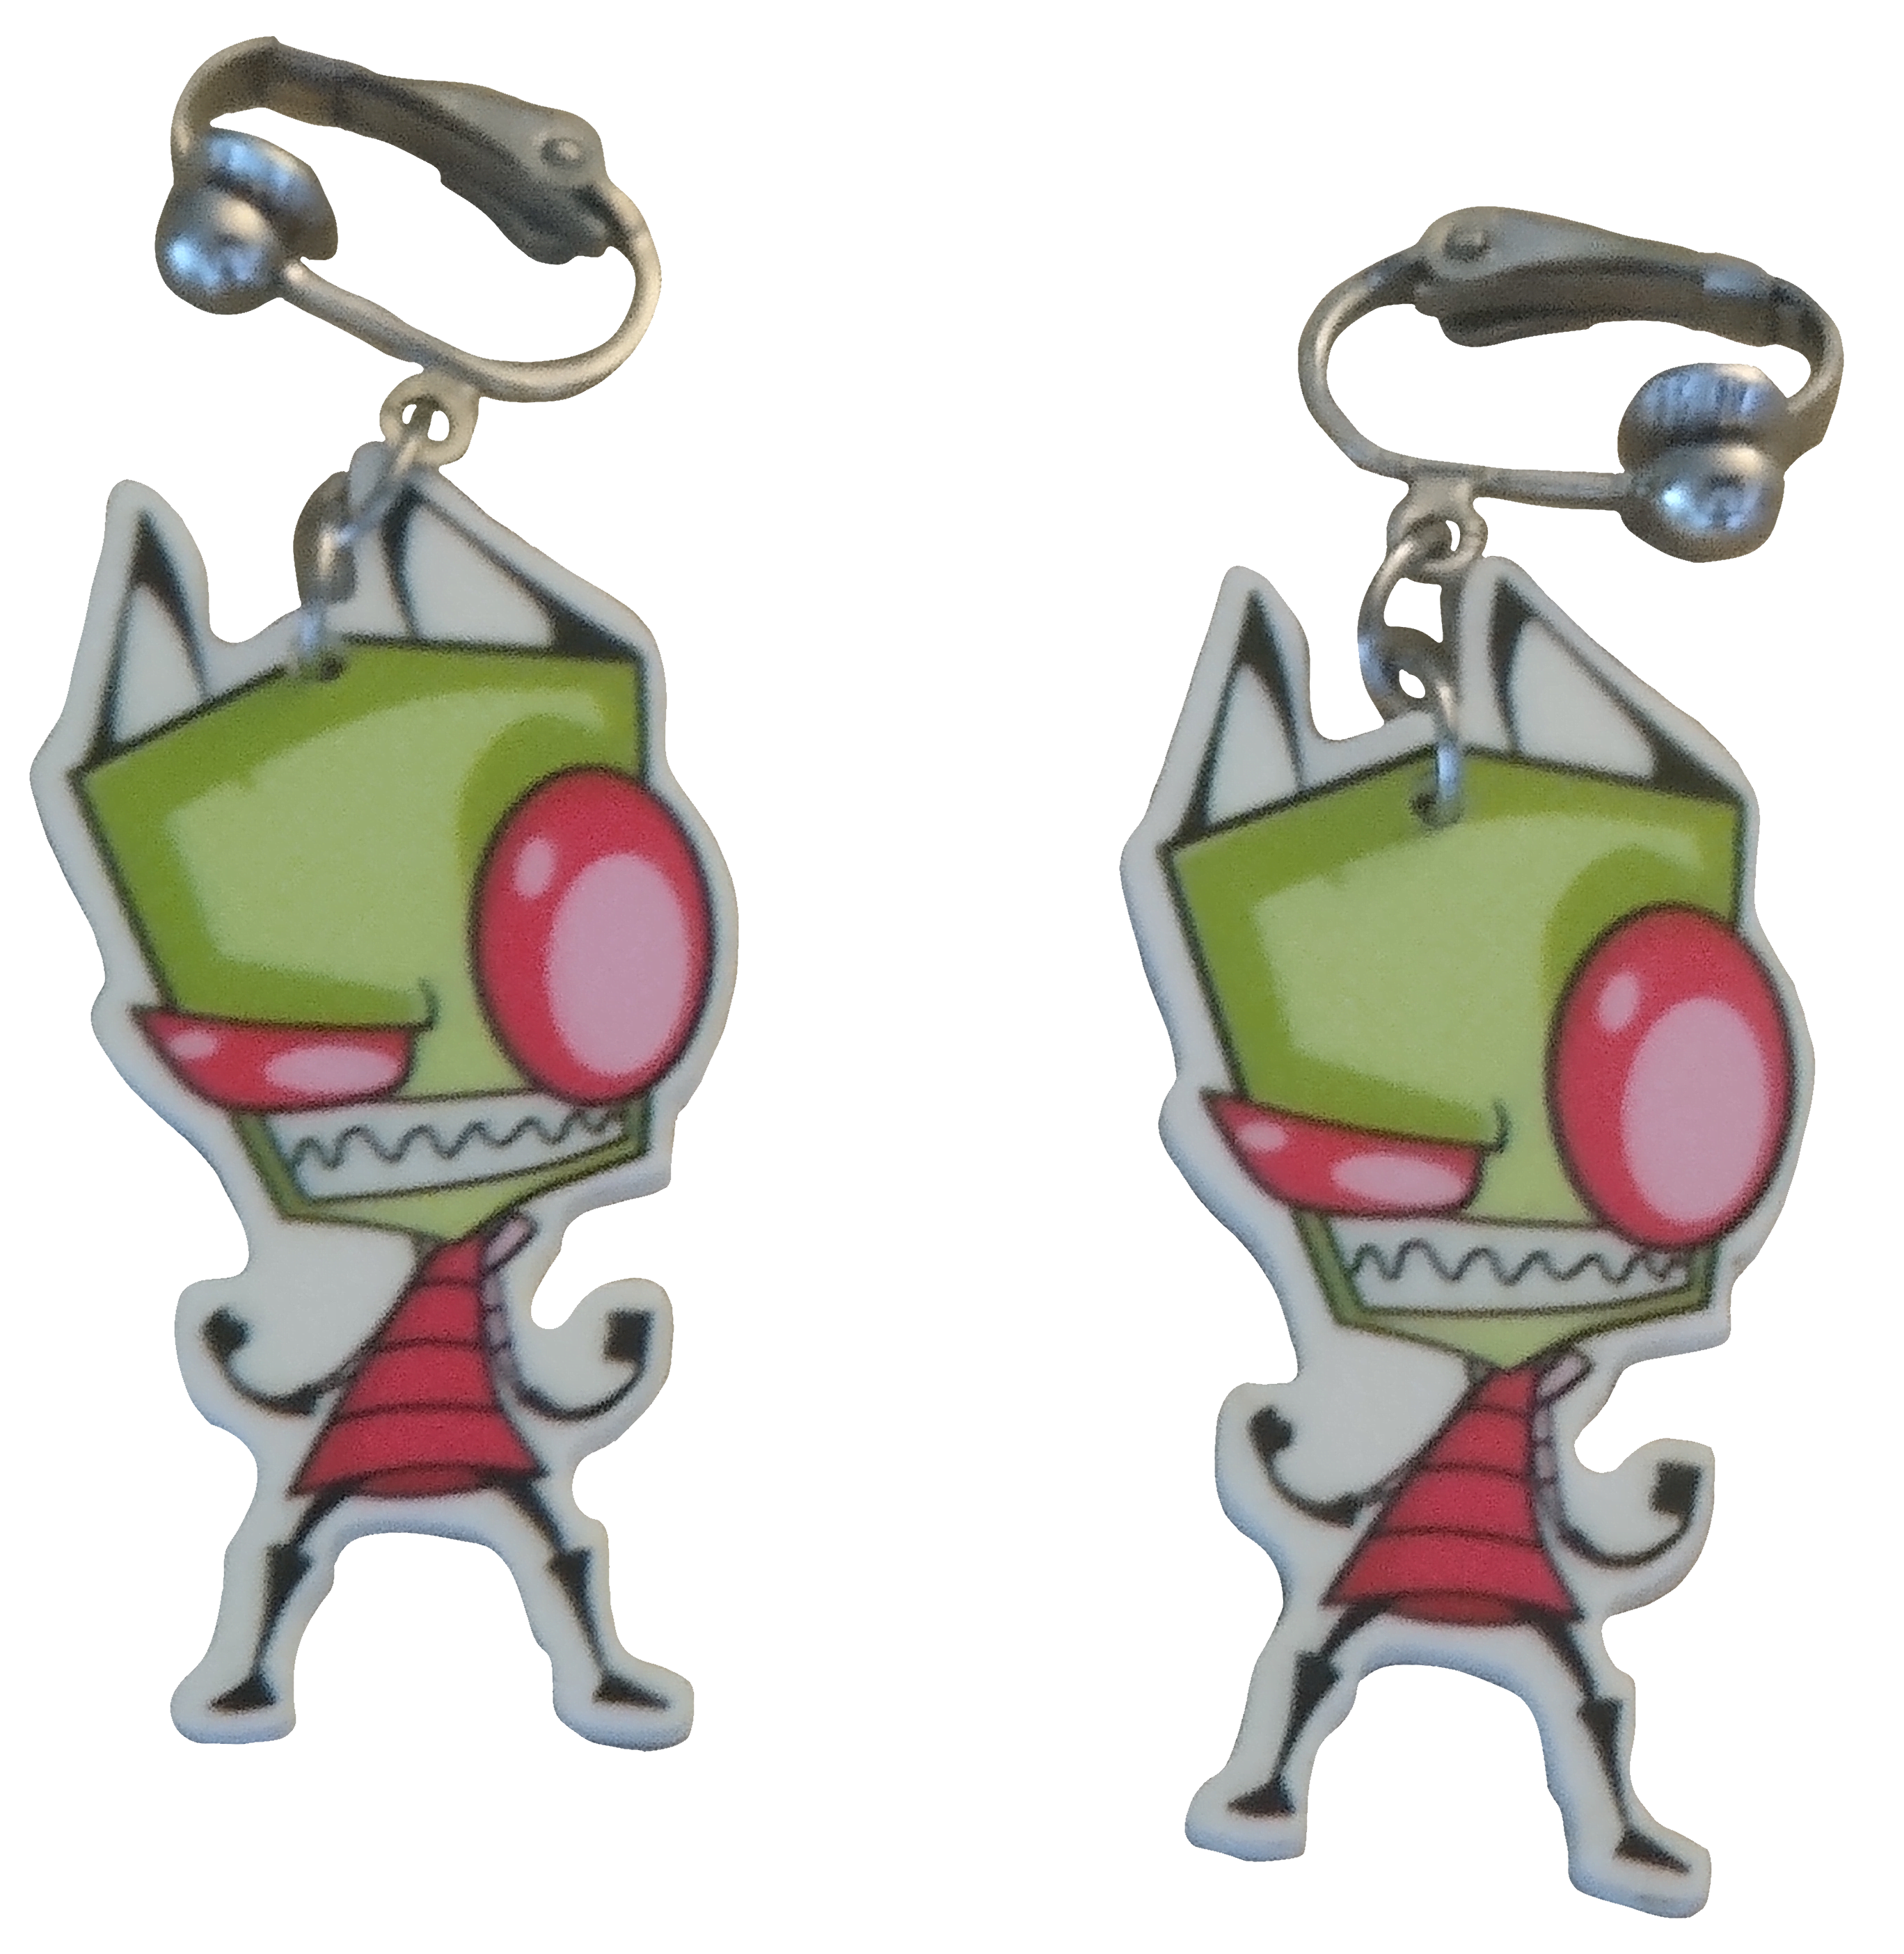 Clip on earrings, with Invader Zim on them.